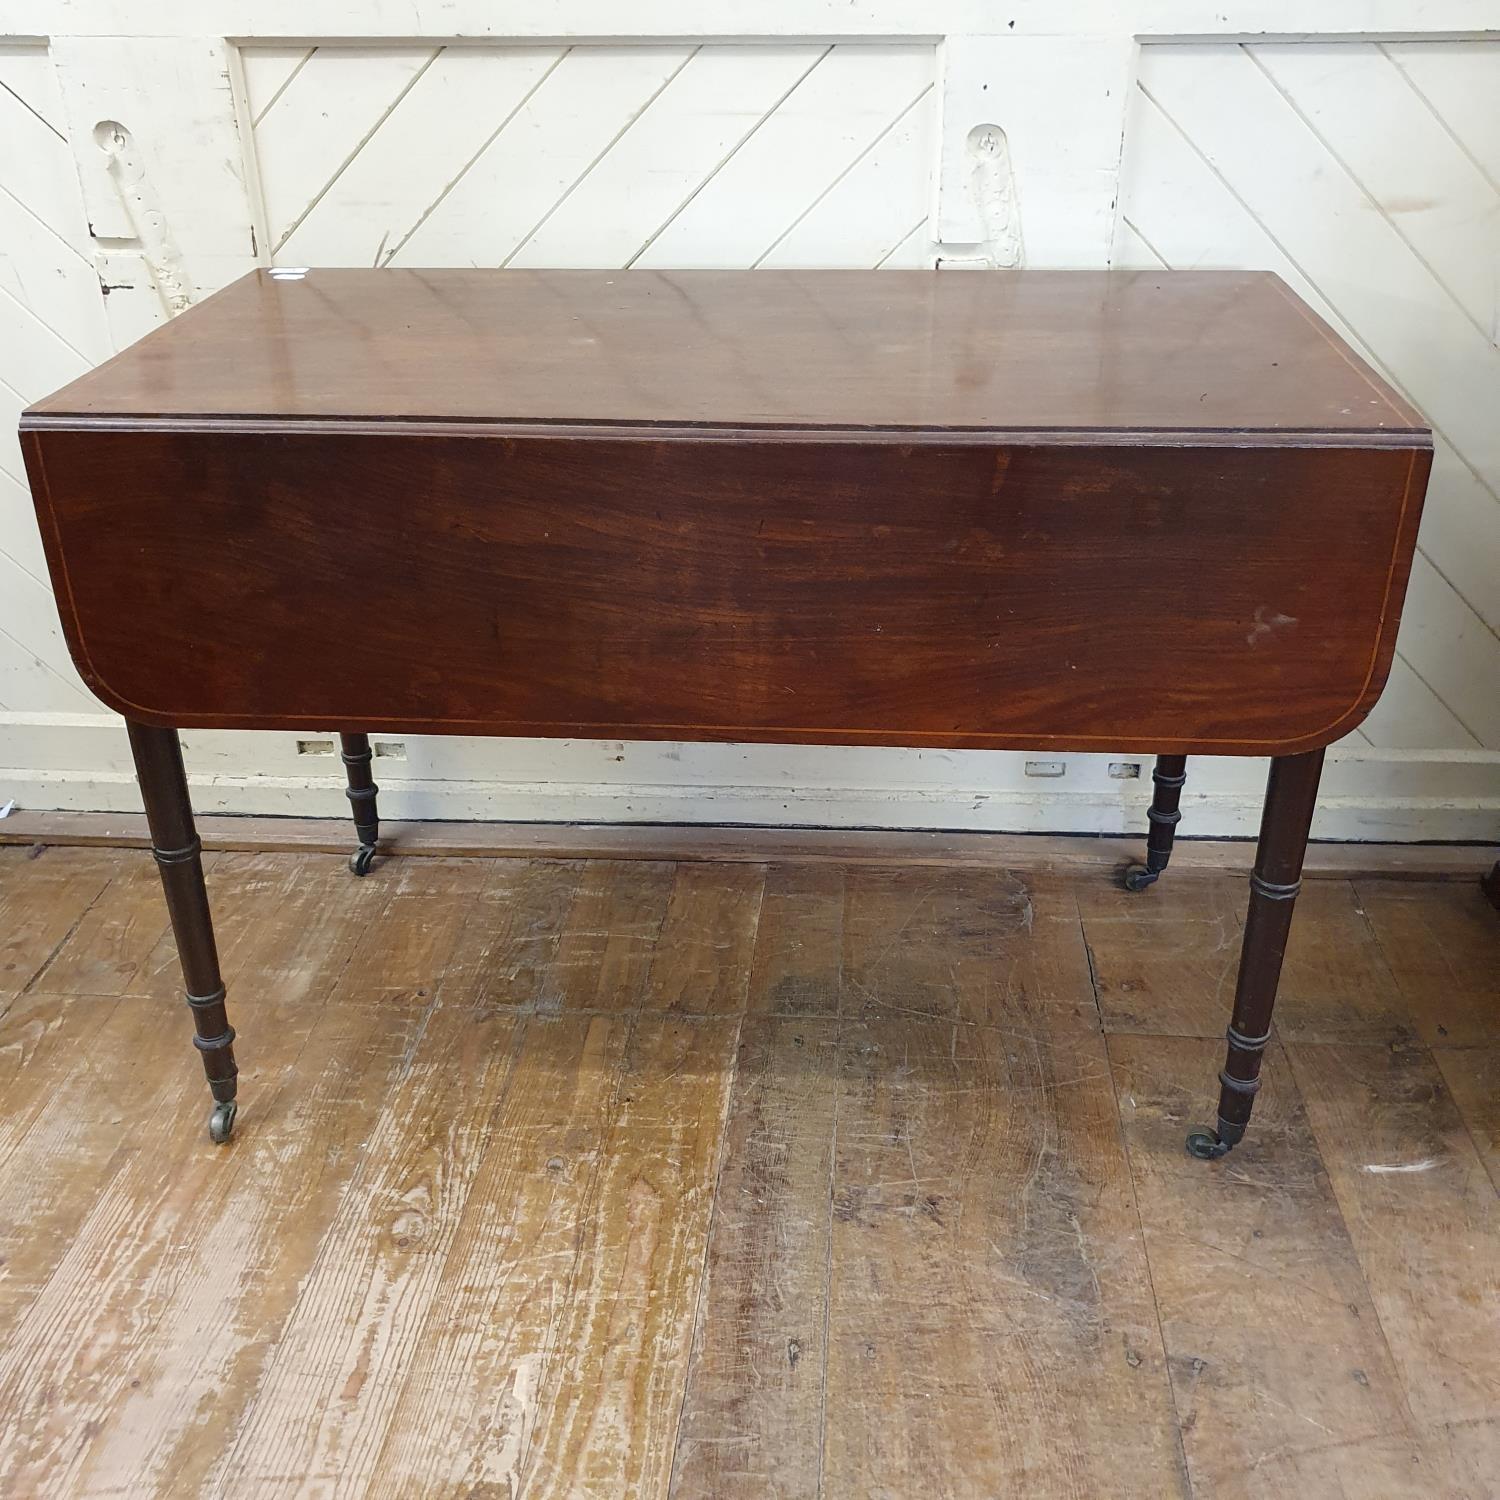 An early 19th century mahogany Pembroke table, on tapering turned legs, 103 cm wide